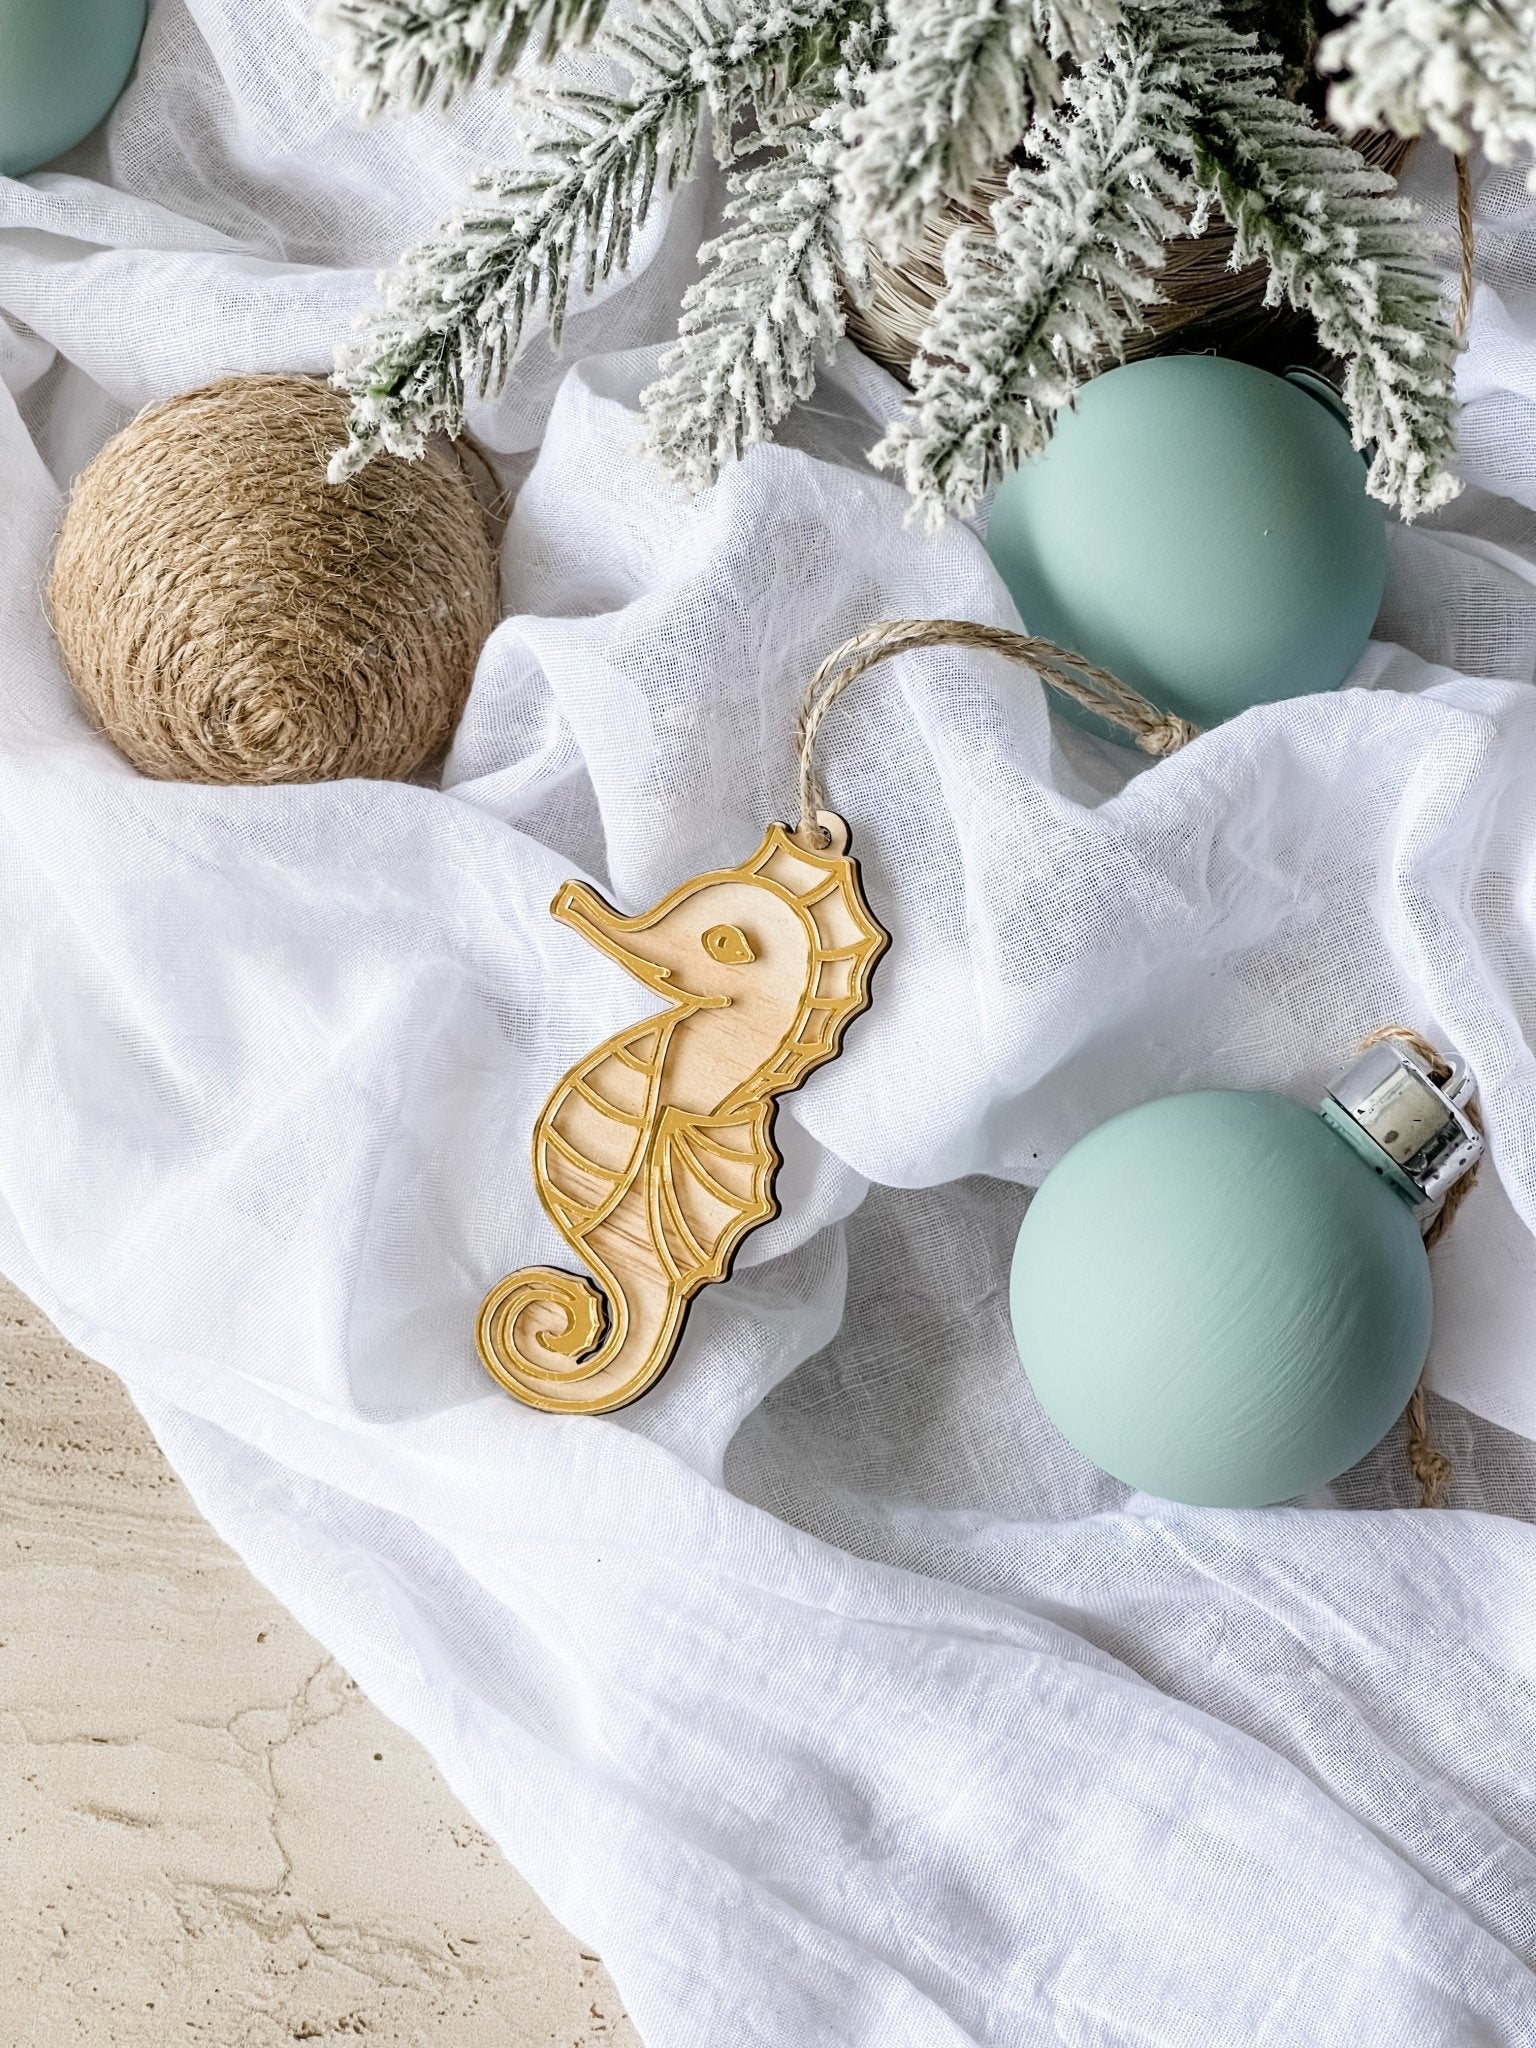 Beach Ornament - Golden Seahorse - The Humble Gift Co.